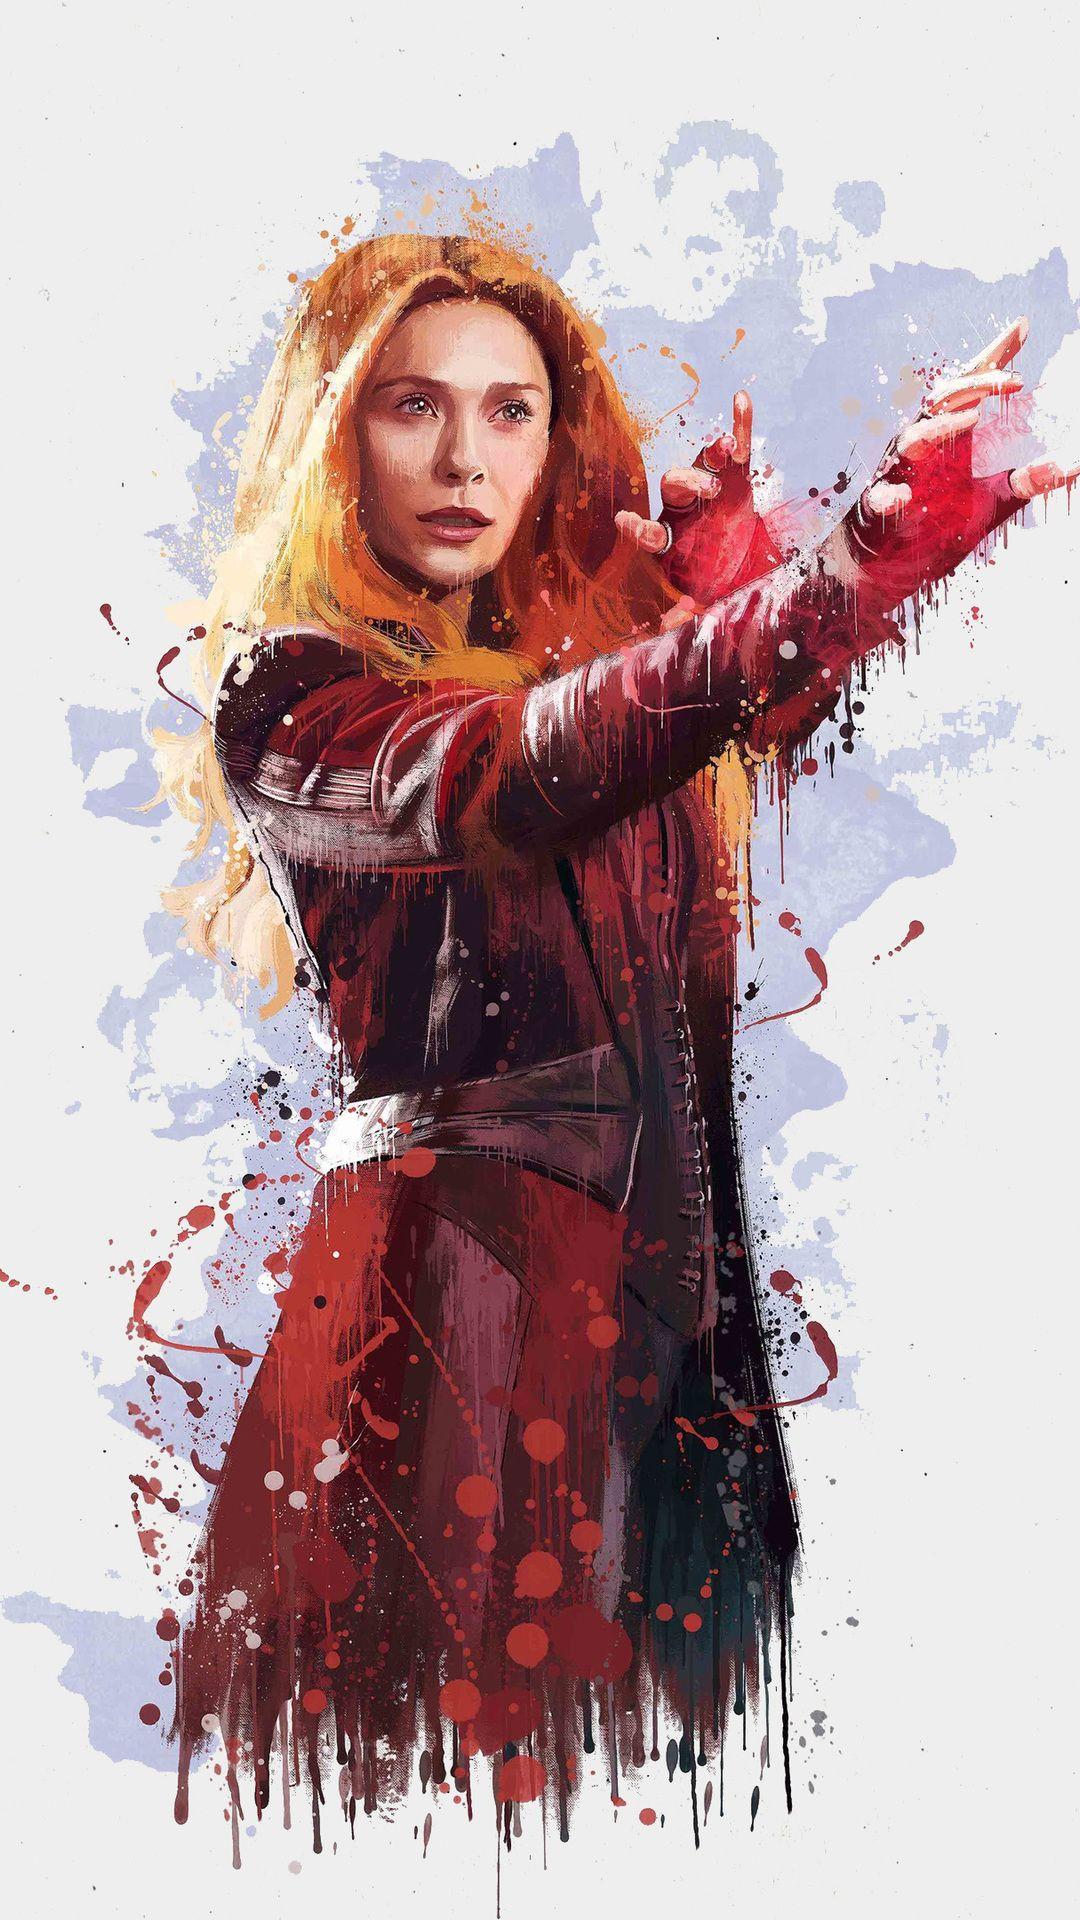 1125x2436 Scarlet Witch Switched Back 4k Iphone XSIphone 10Iphone X HD 4k  Wallpapers Images Backgrounds Photos and Pictures